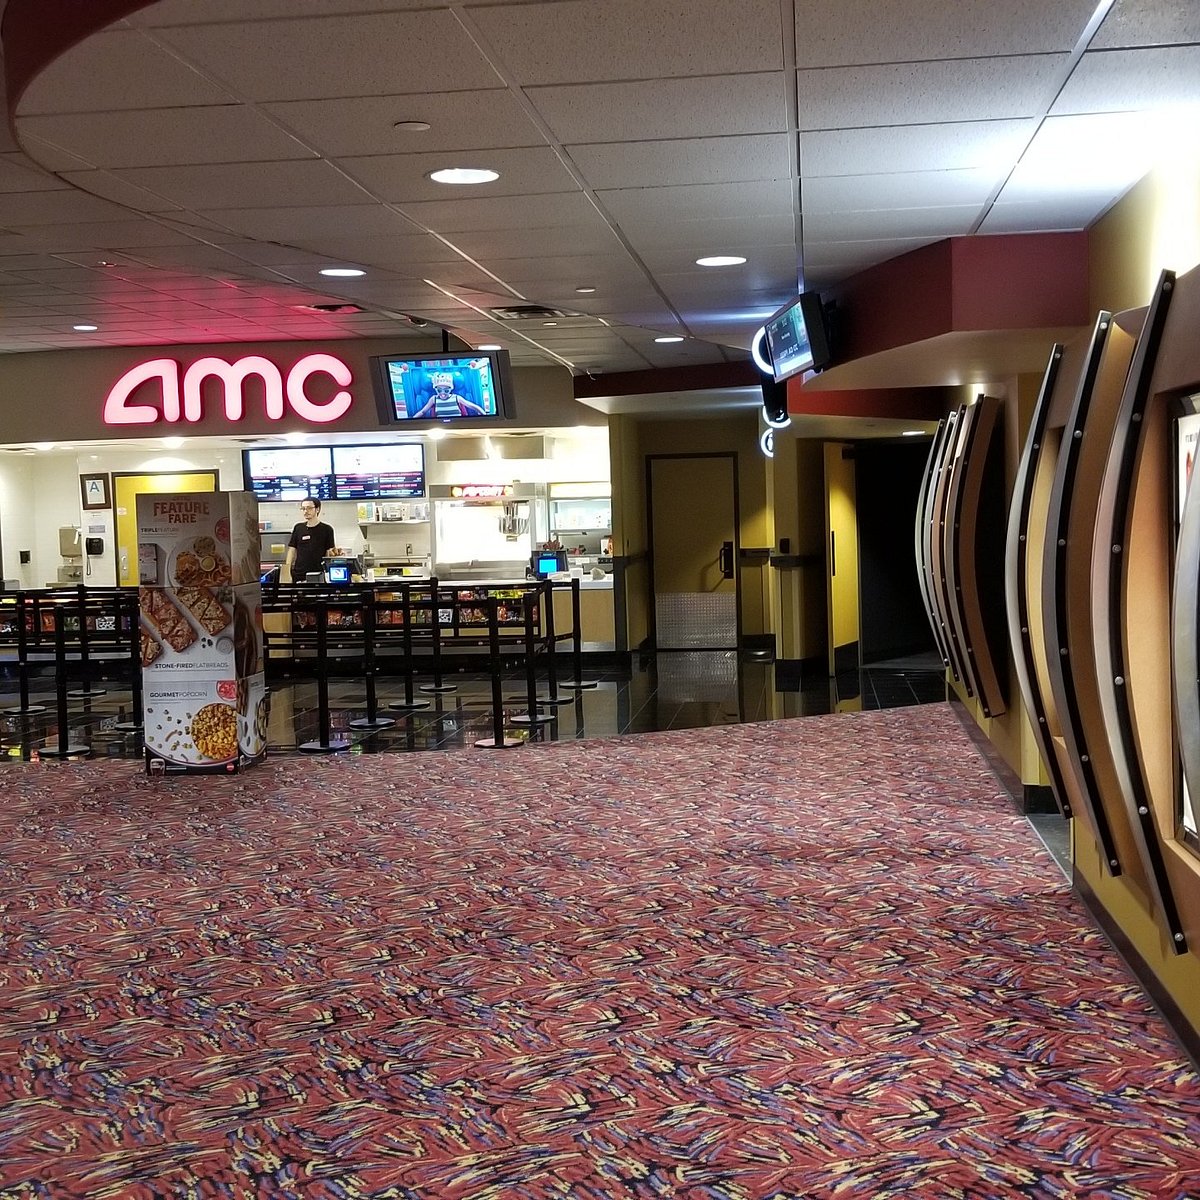 Promenade mall's AMC Theater will close and reopen at Westfield Topanga in  Warner Center – Daily News